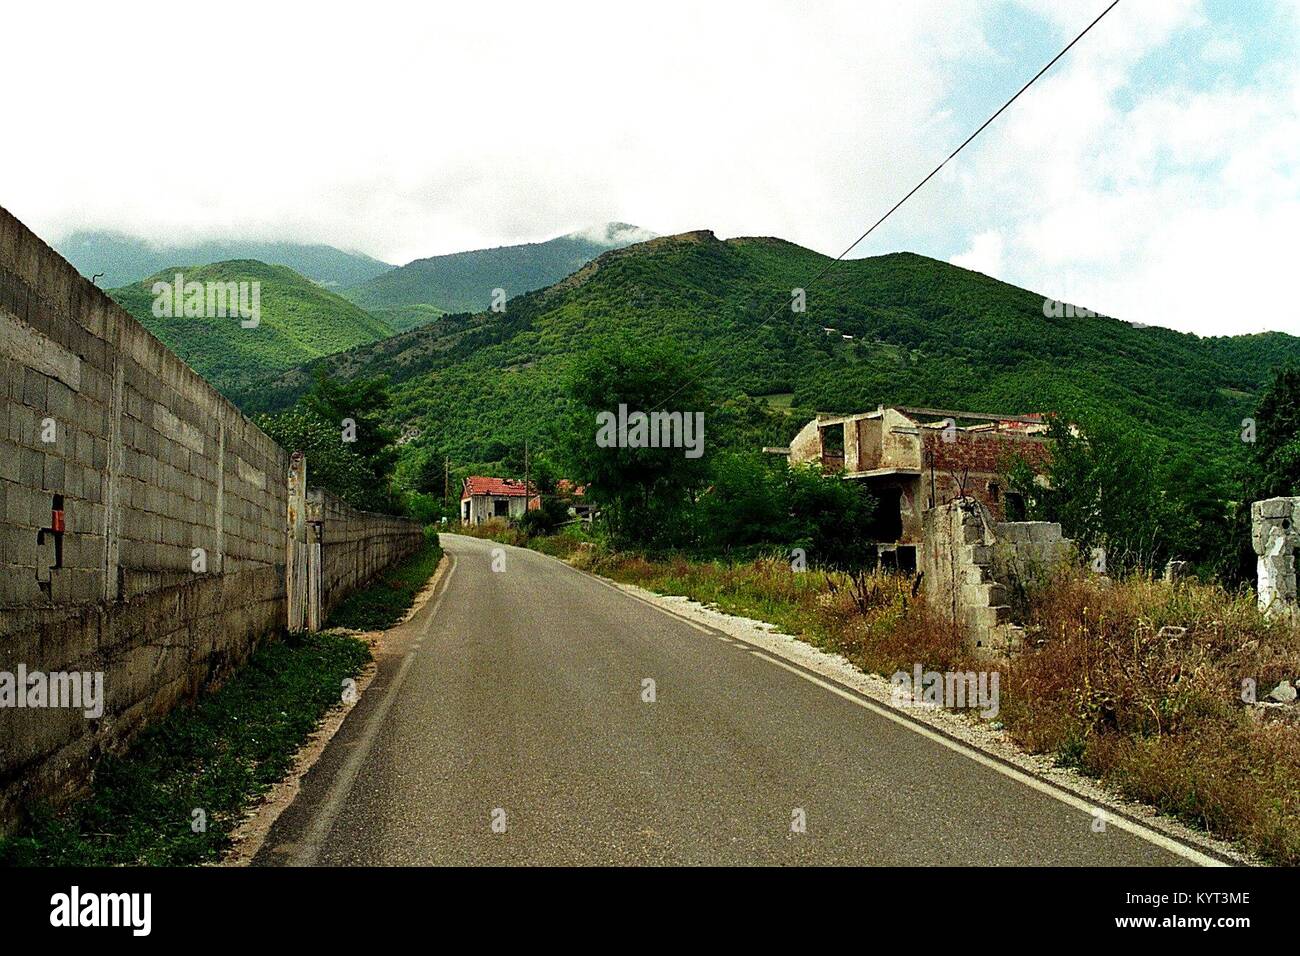 The Serbian village of Belo Polje (Bellopoja) near Peć/Peja in Kosovo was burnt down in March 2004 by Albanians. The village remained devastated, the inhabitants fled. This picture from August 2006 Shows the empty and destroyed main road through this village. Stock Photo